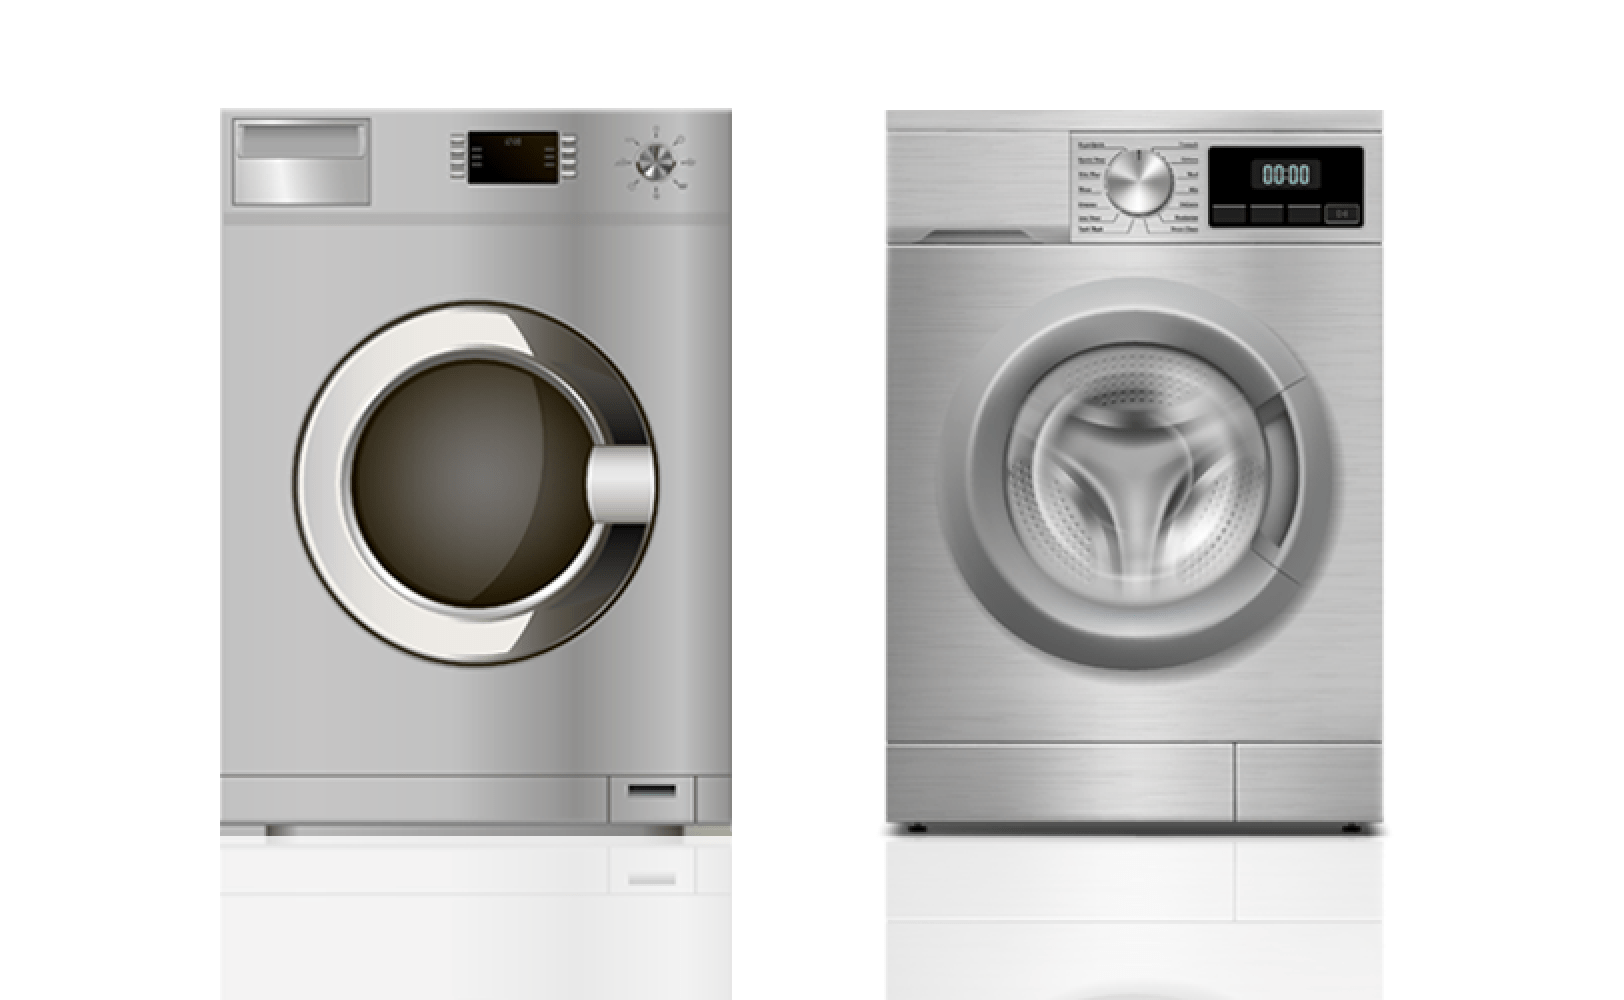 Washer Repair Service in Baiting Hollow